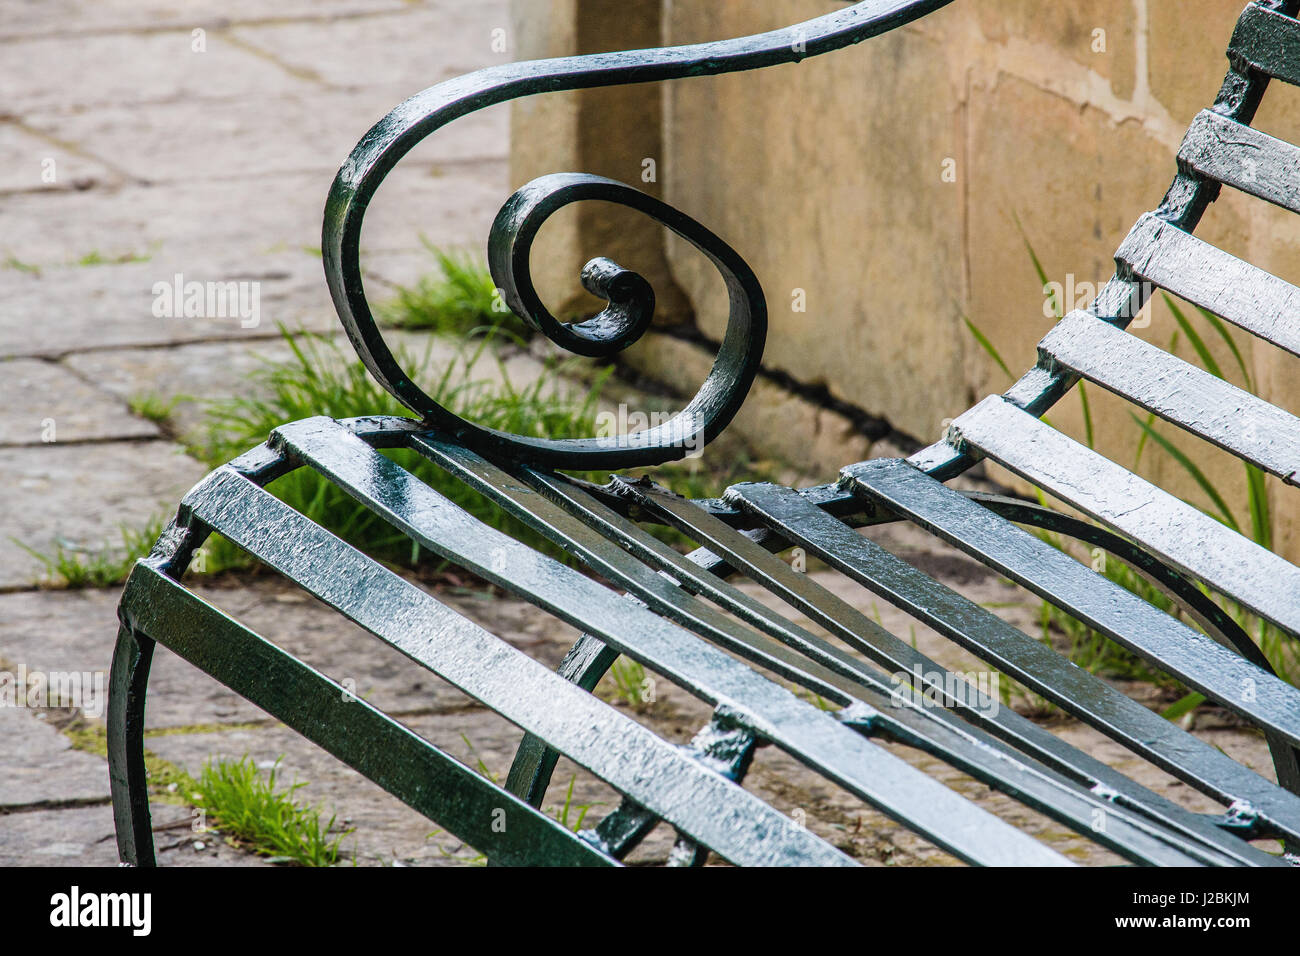 Close up detail of a green painted metal bench in a park. Curved arm rest. Ta Qali National Park, Malta Stock Photo